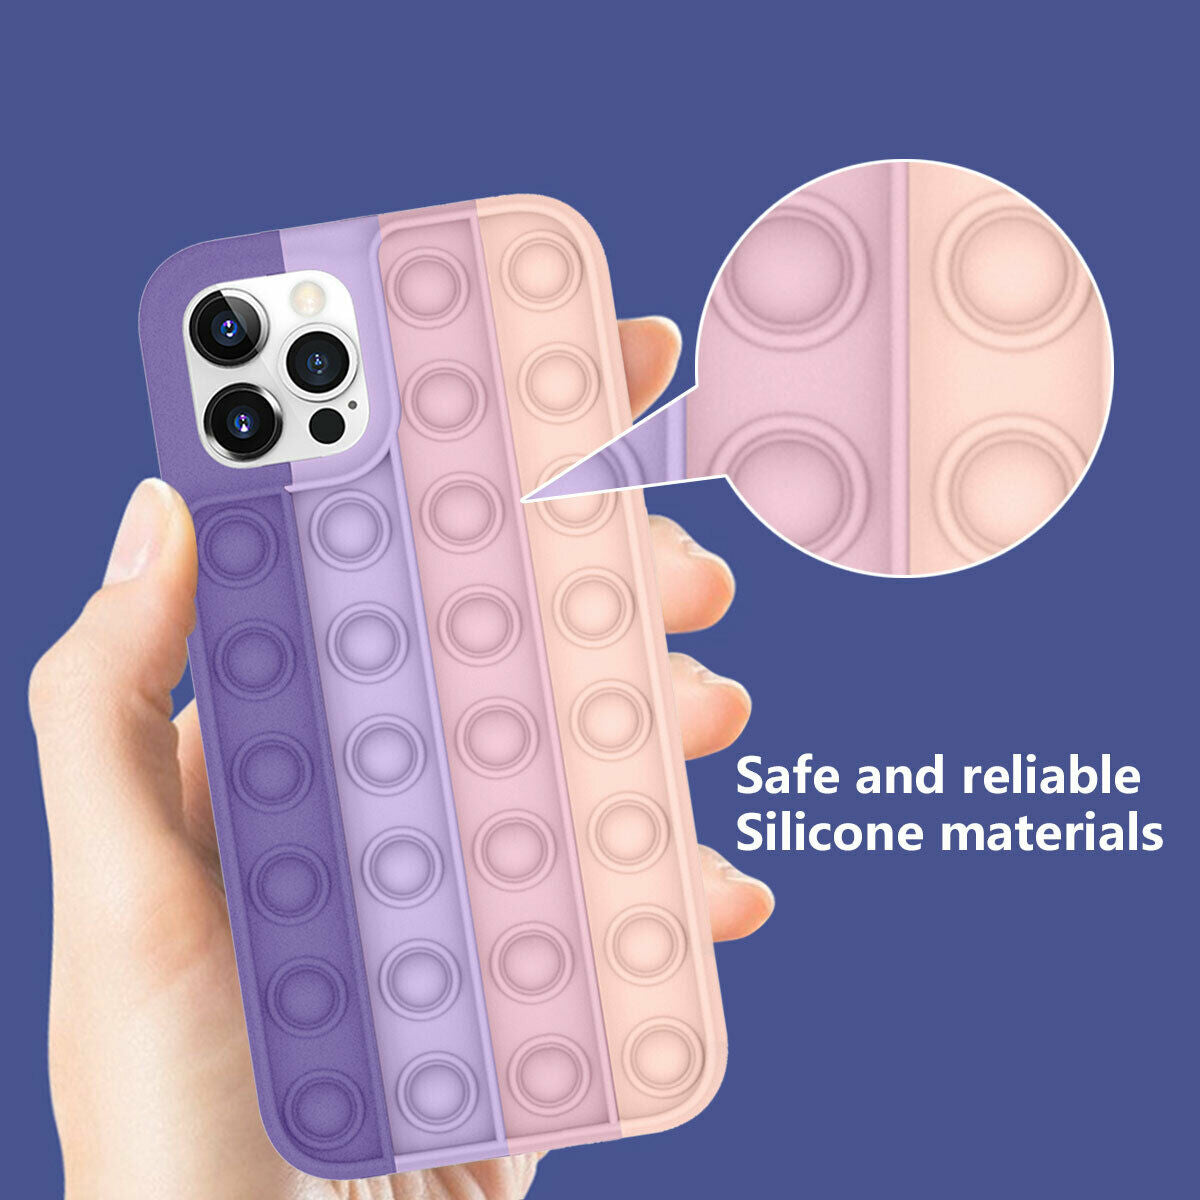 Slim Silicone Shockproof Case For iPhone